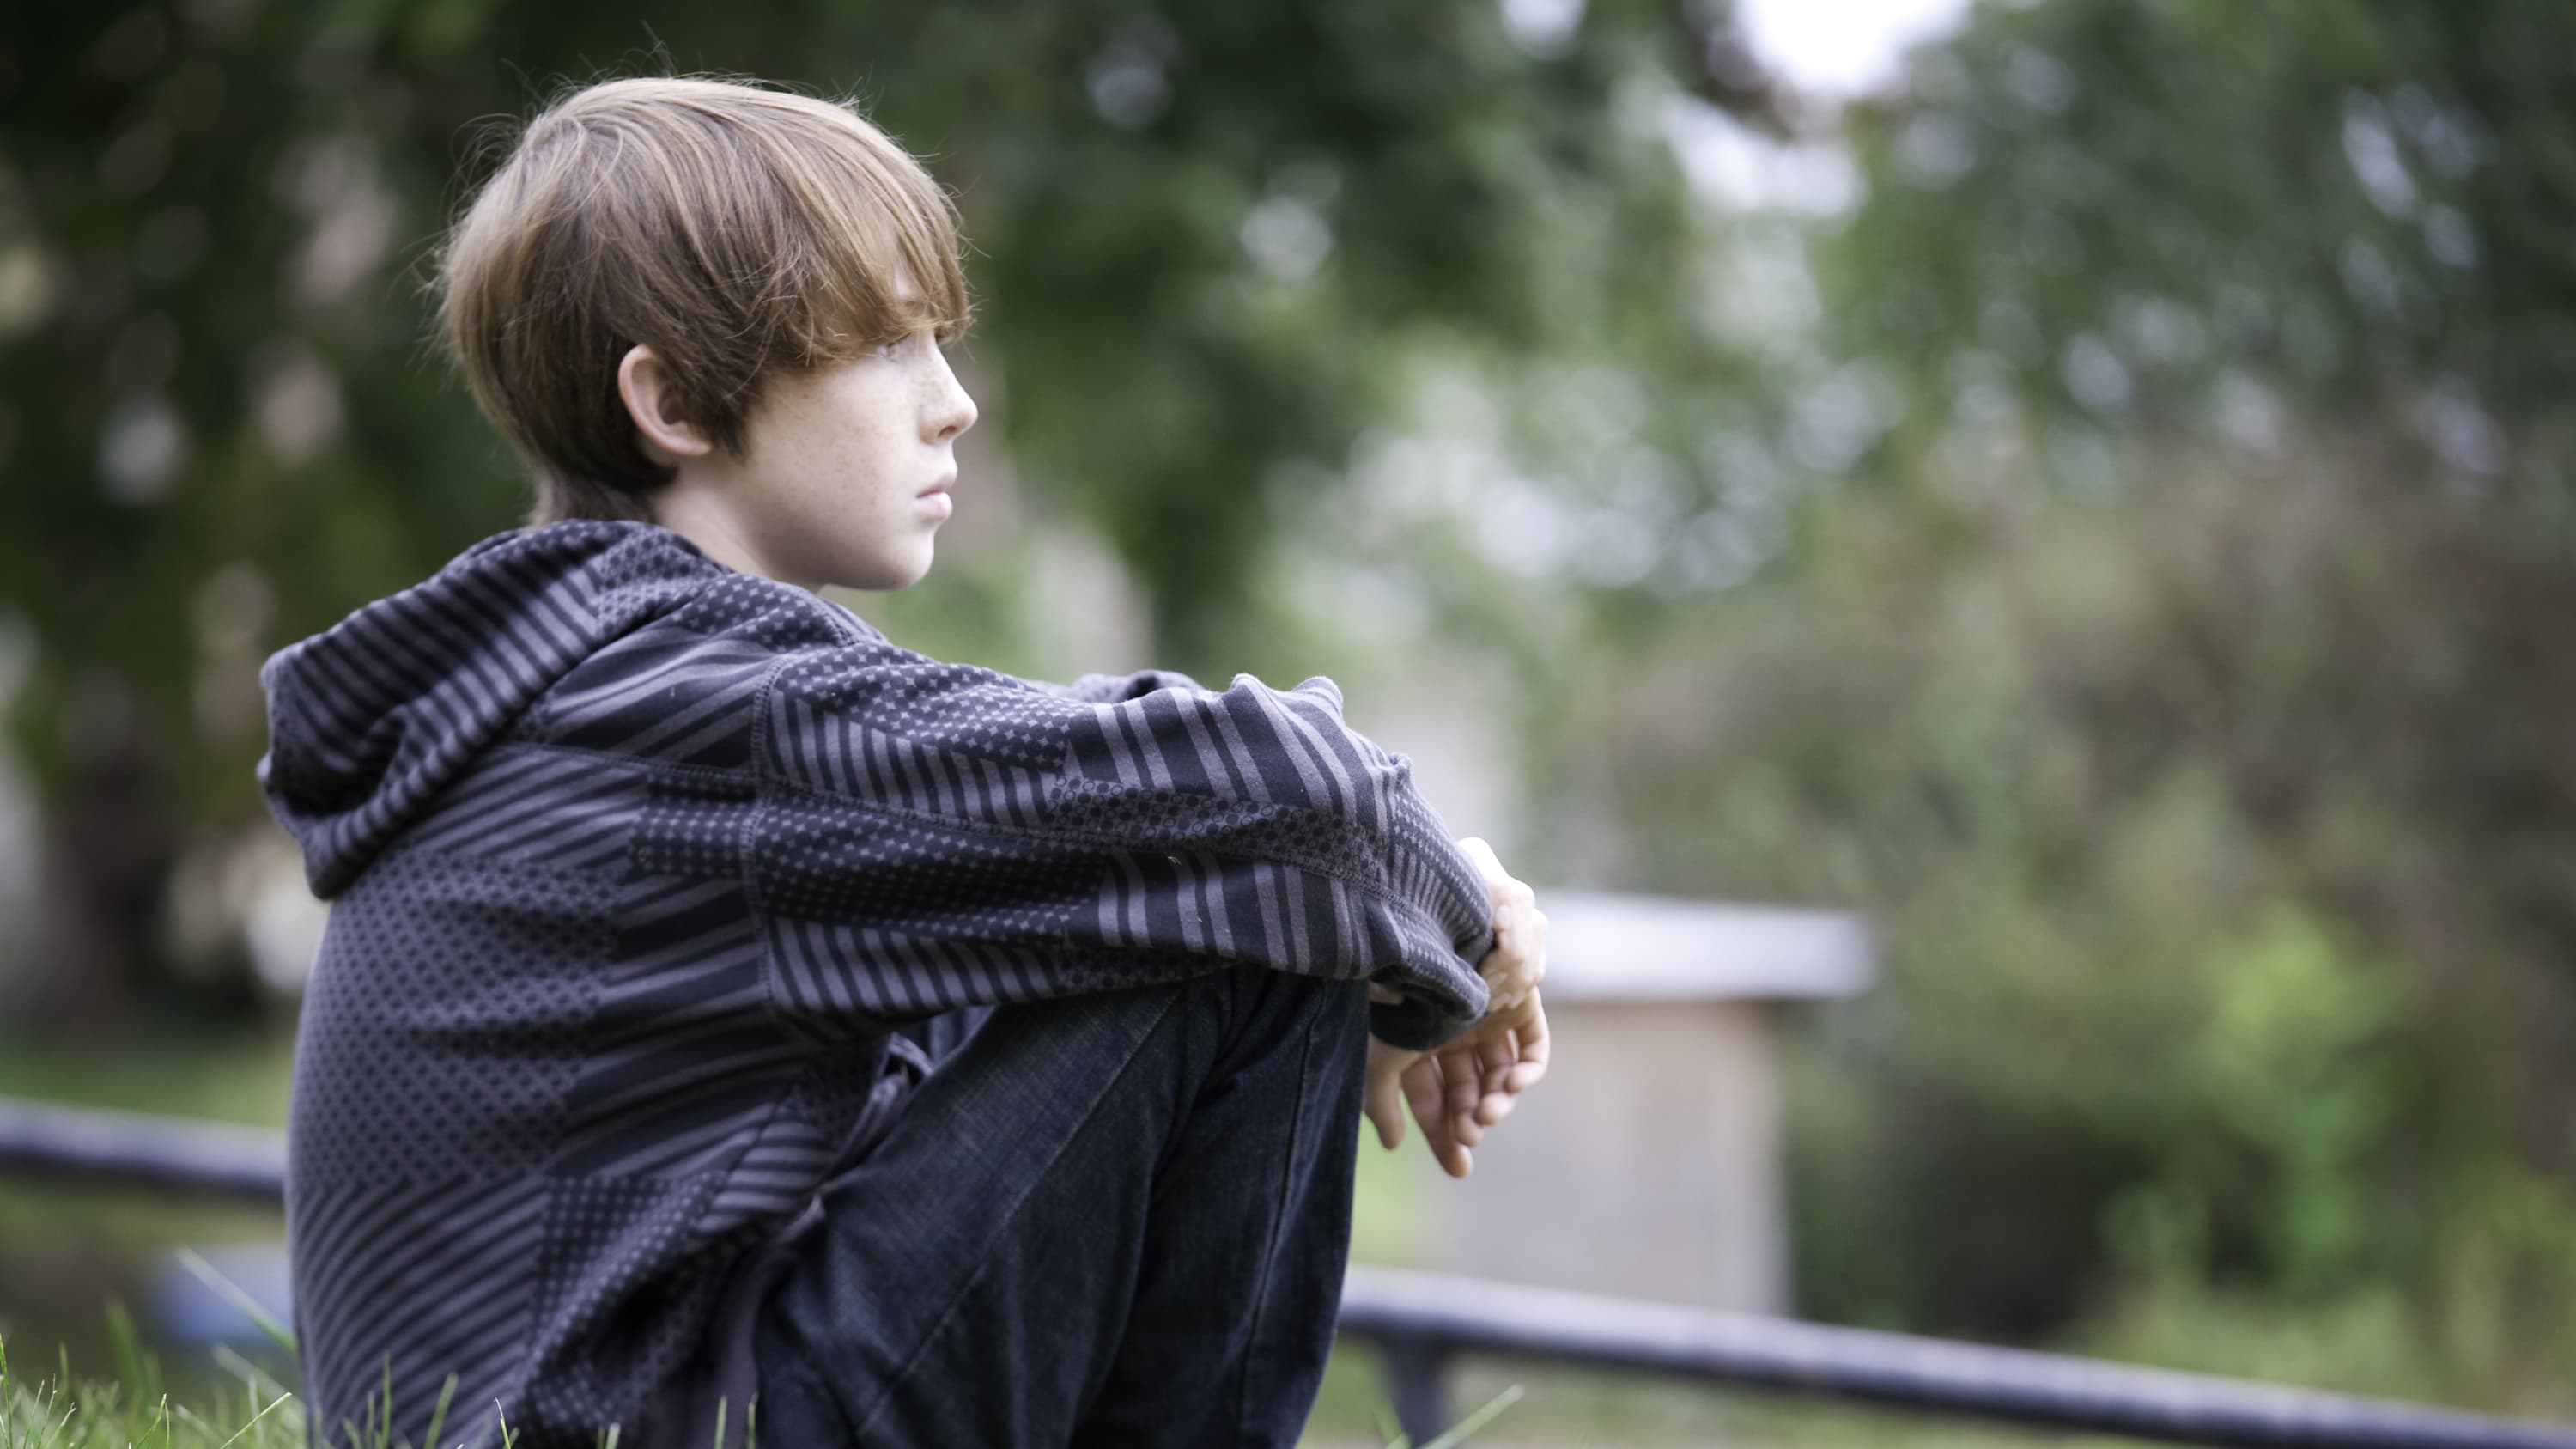 Photo of a young boy who may have stress and anxiety sitting contemplatively on the ground.